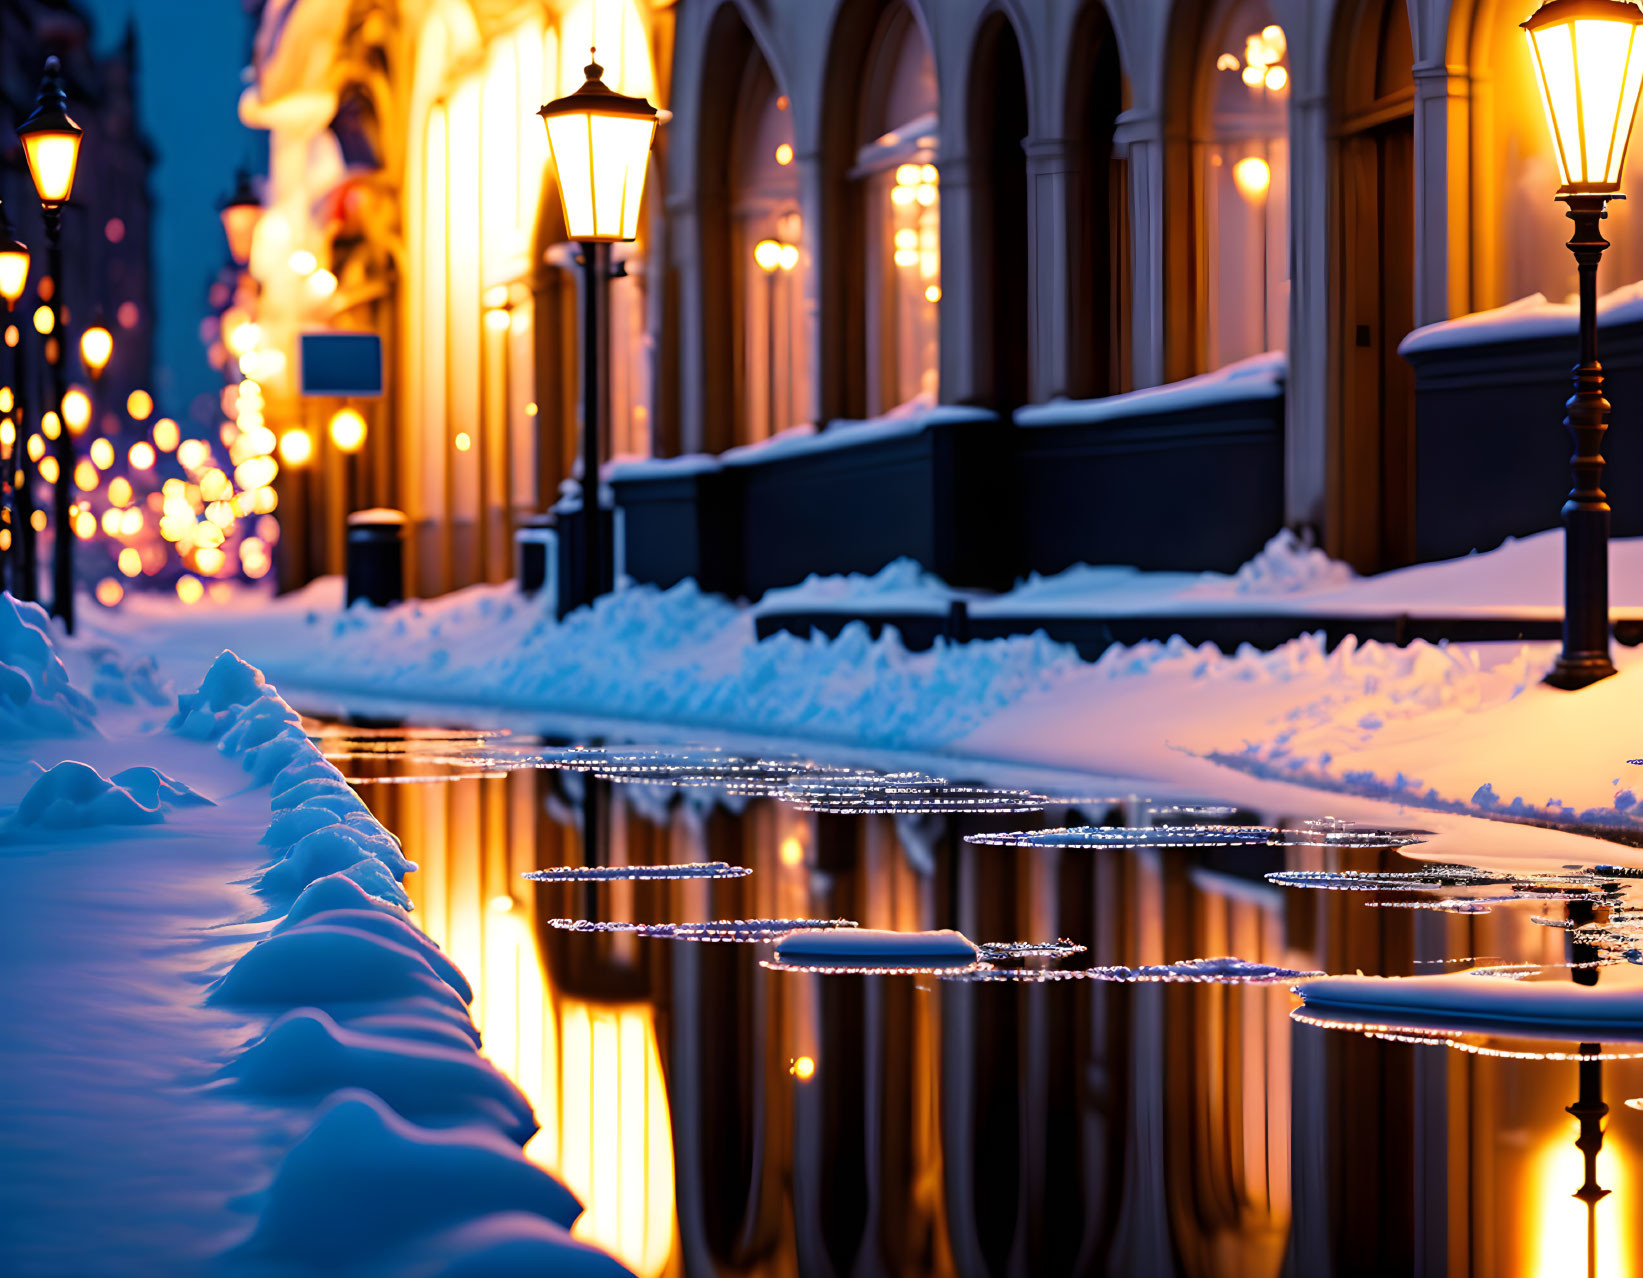 Snowy Street at Twilight with Warm Lights Reflecting on Wet Ground